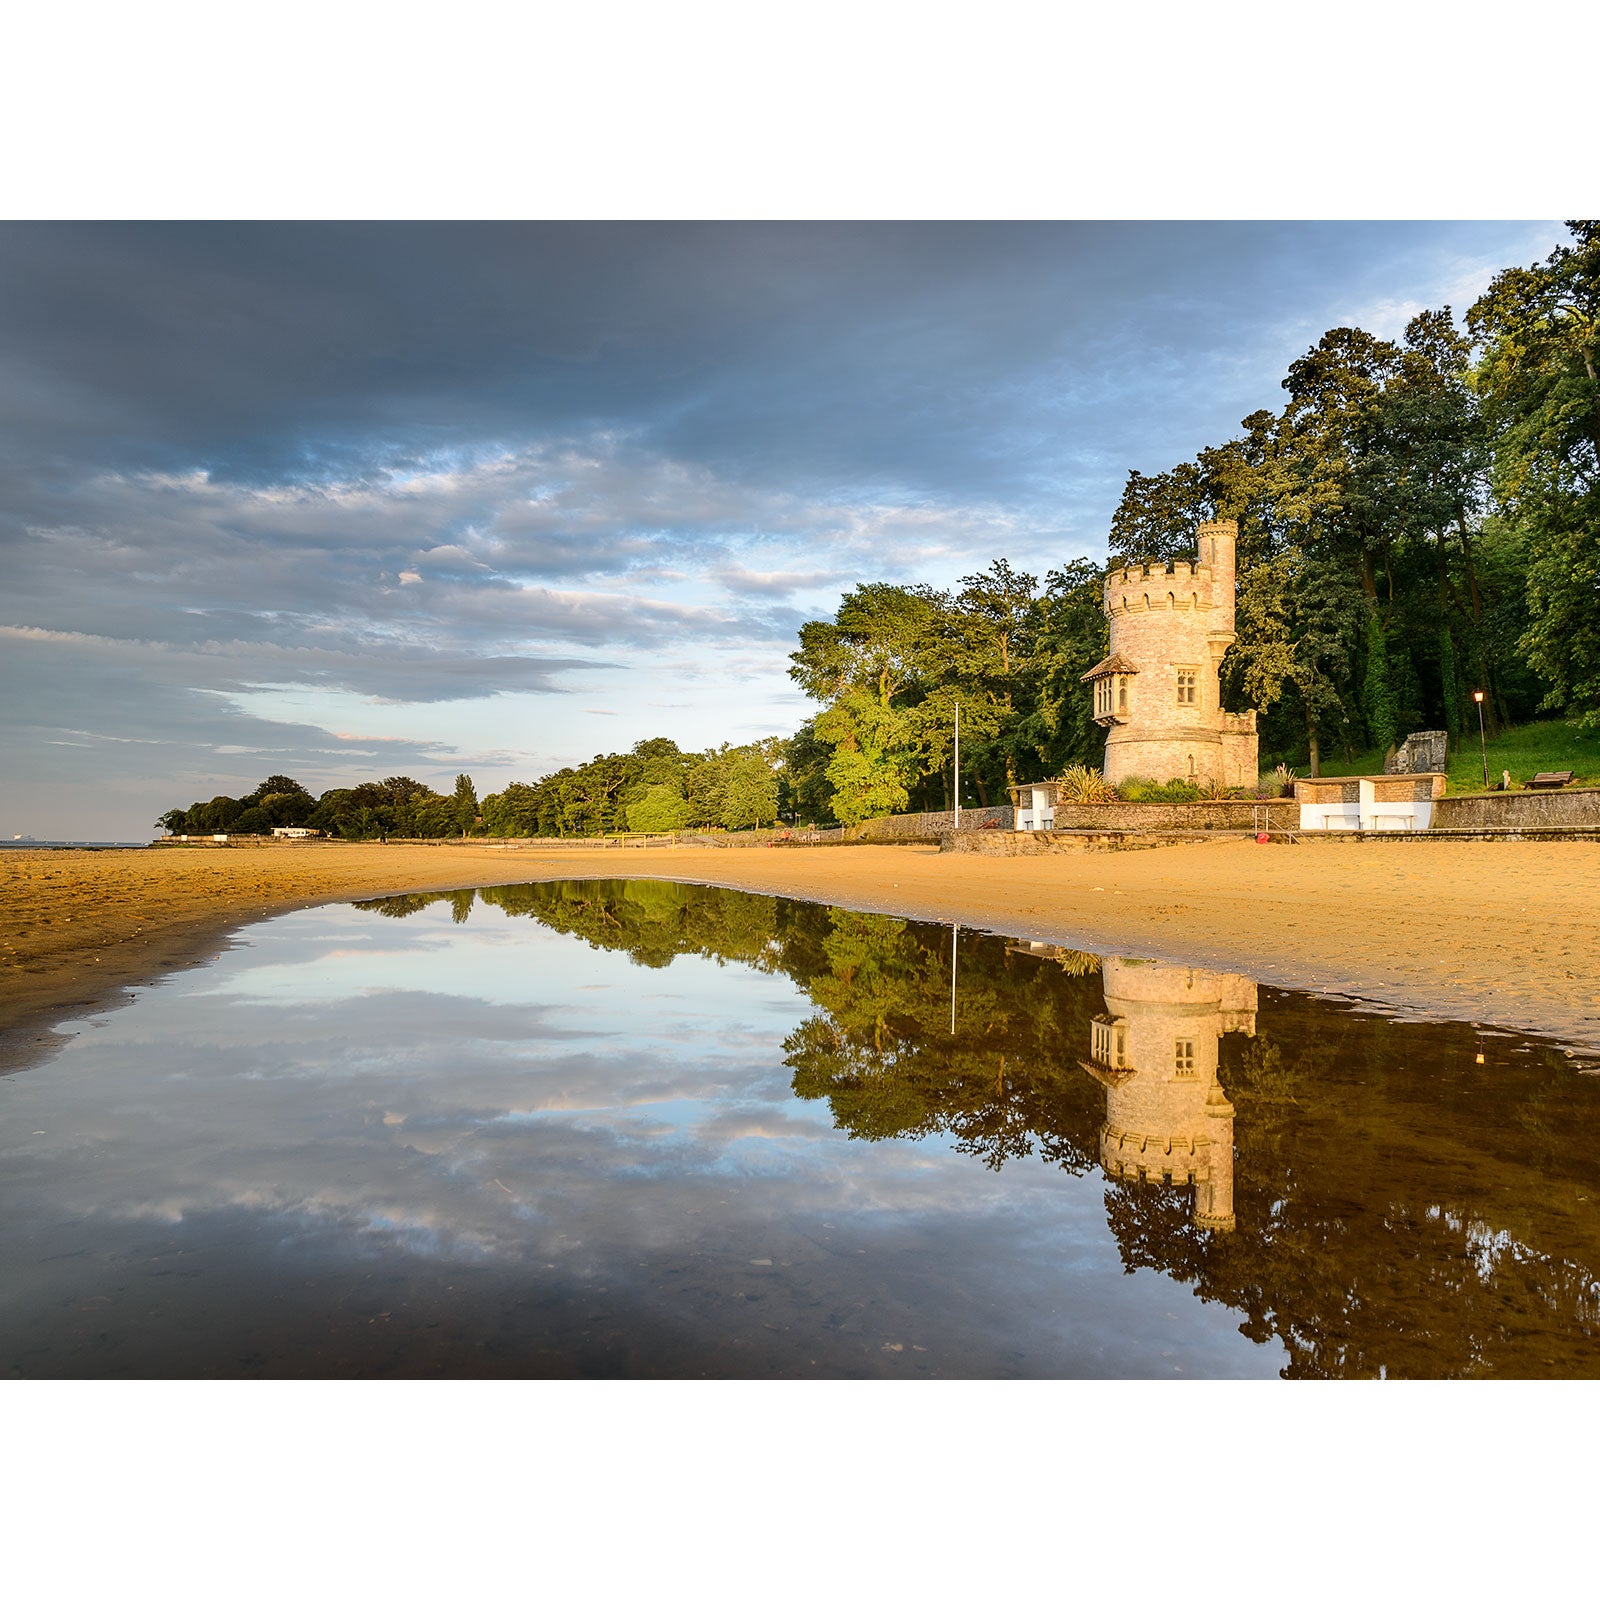 Appley Tower reflected in water on Isle of Wight beach at low tide under a clear sky, captured by Available Light Photography.